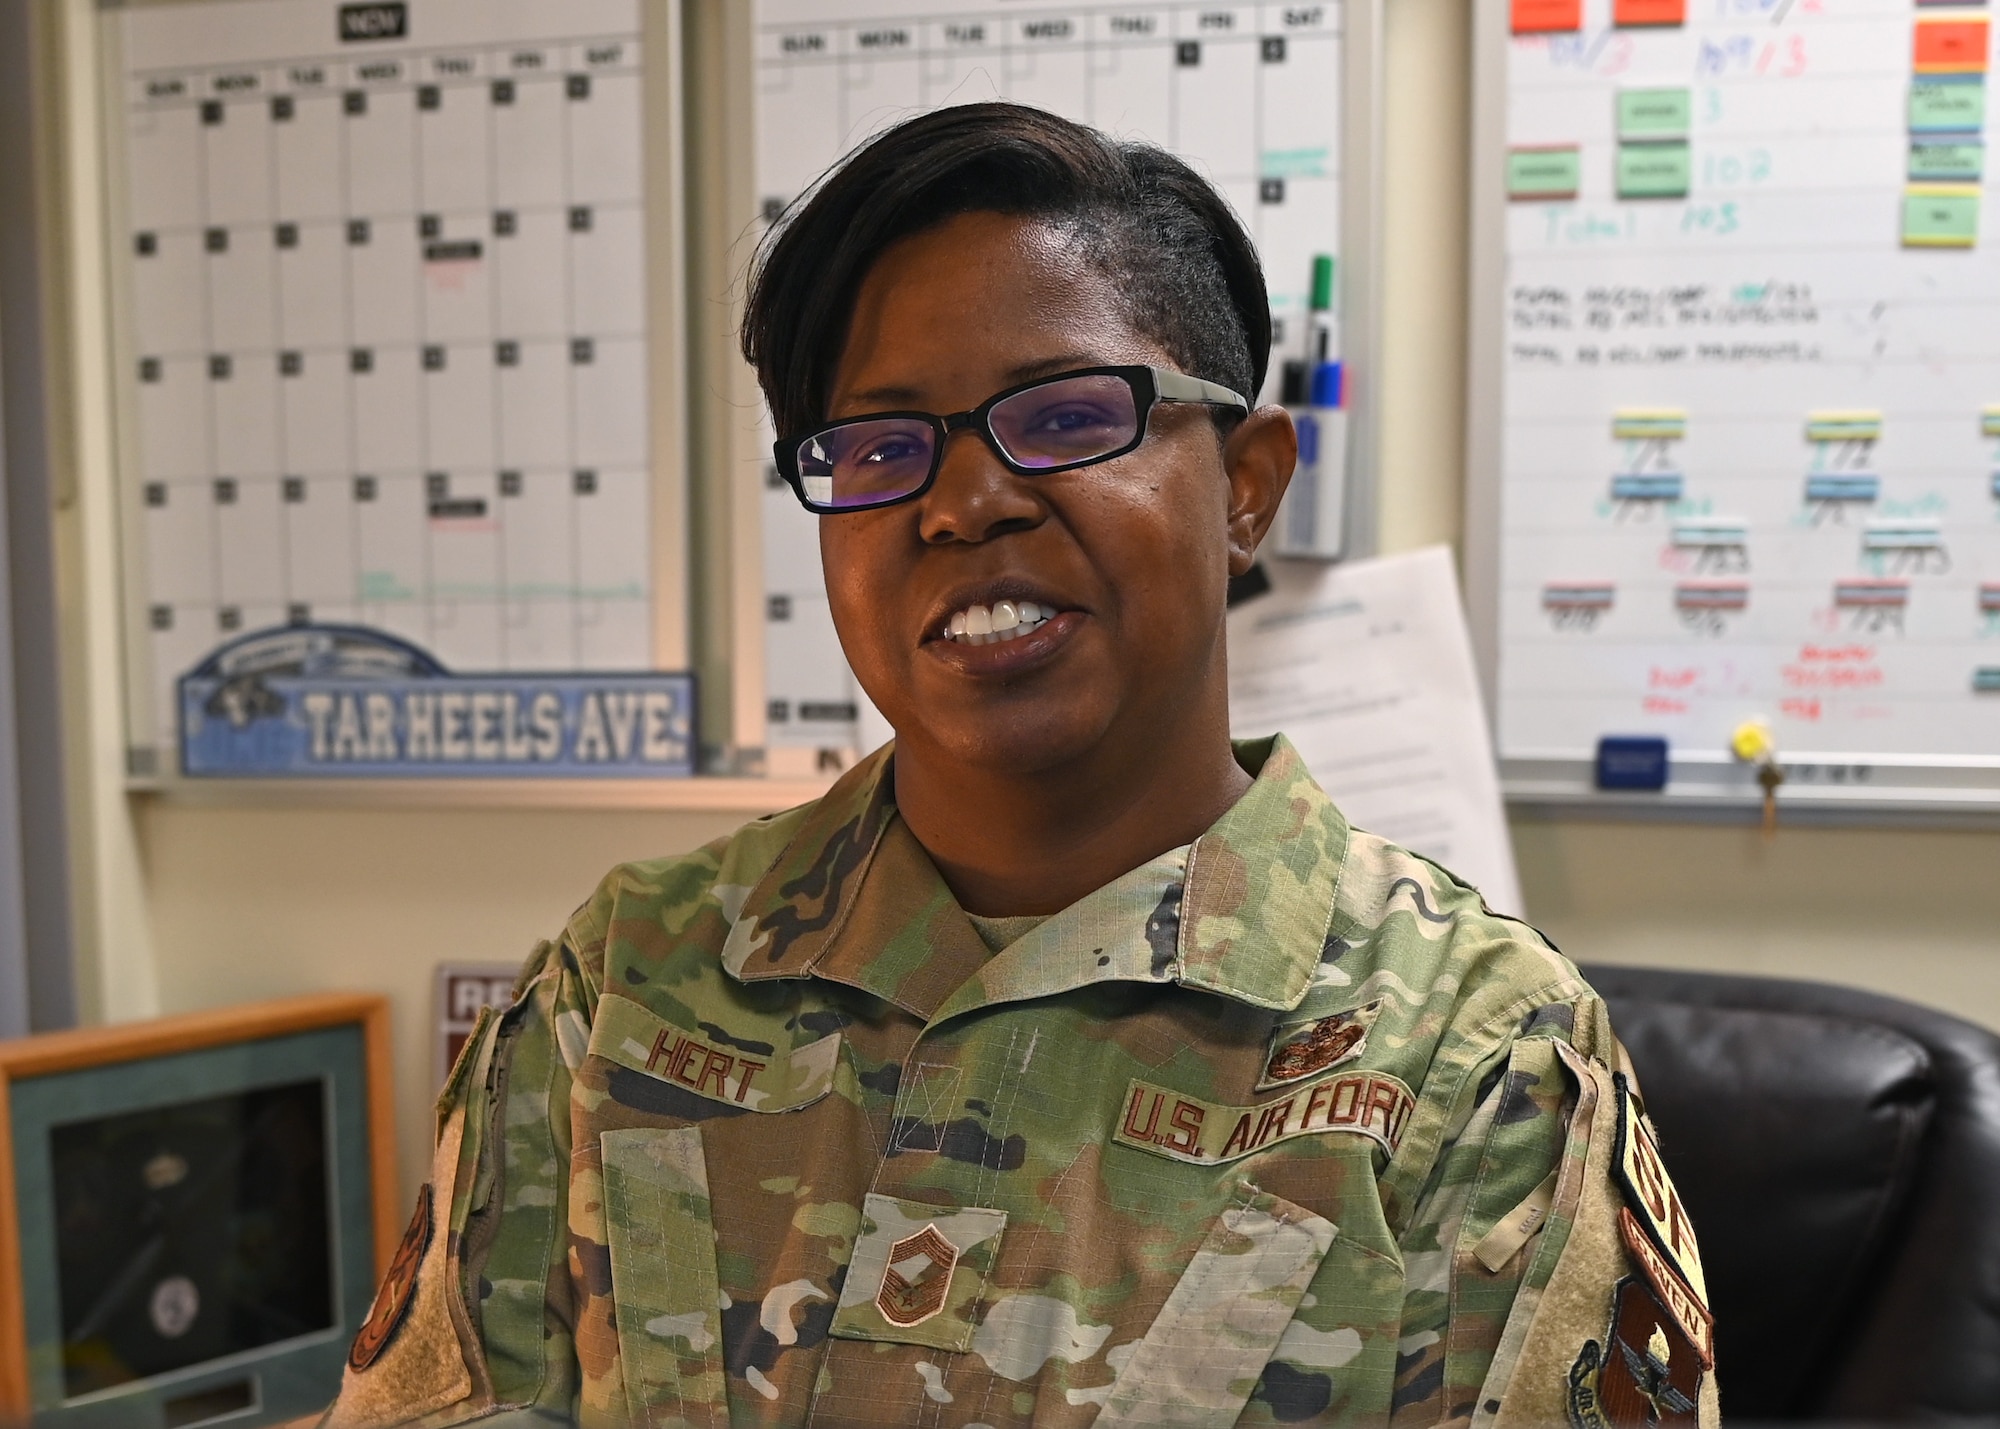 U.S. Air Force Chief Master Sgt. Chasity Hert, 17th Security Forces Squadron senior enlisted leader, poses in her office at Goodfellow Air Force Base, Texas, May 31, 2022. Hert served in the Air Force for 23 years and advocates for an open-minded military. (U.S. Air Force photo by Senior Airman Ethan Sherwood)